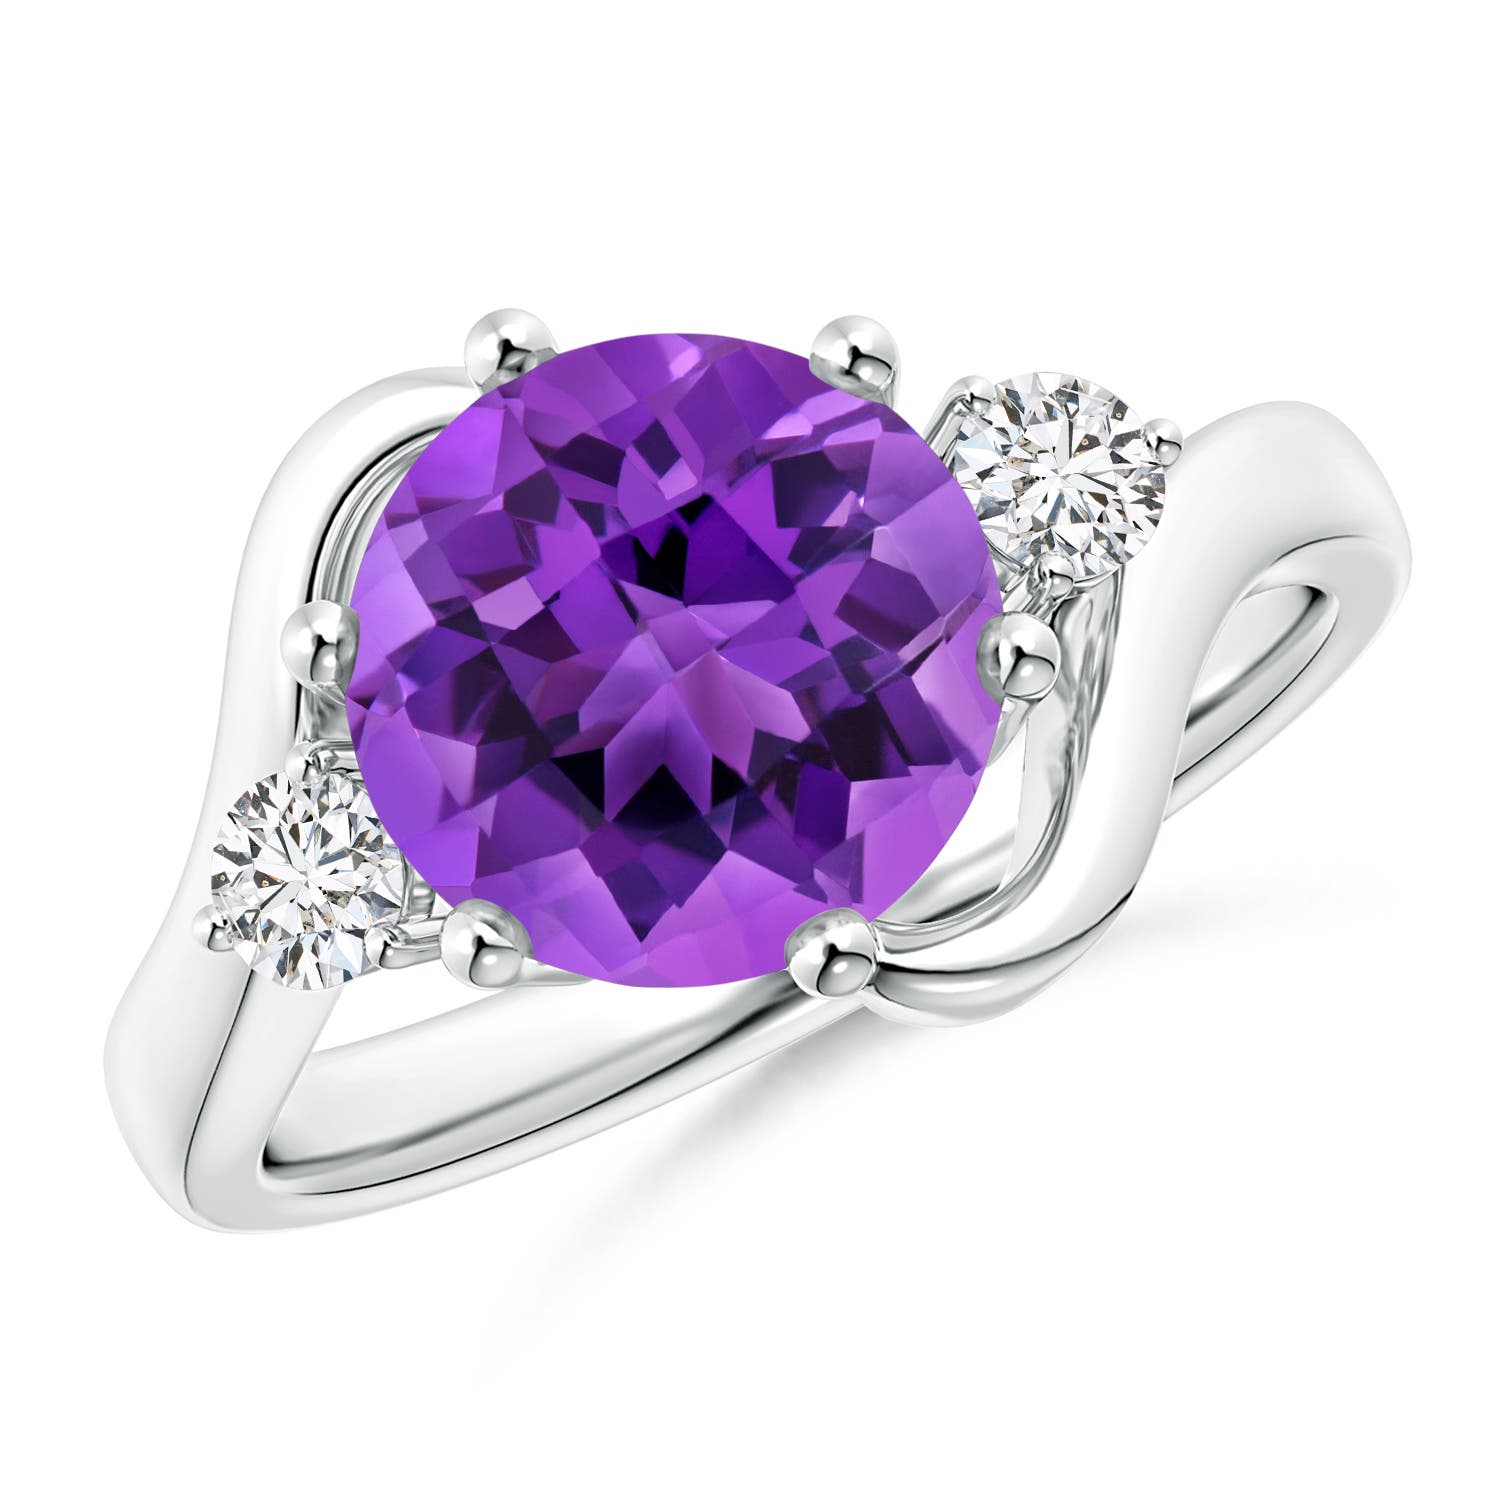 AAA - Amethyst / 2.31 CT / 14 KT White Gold